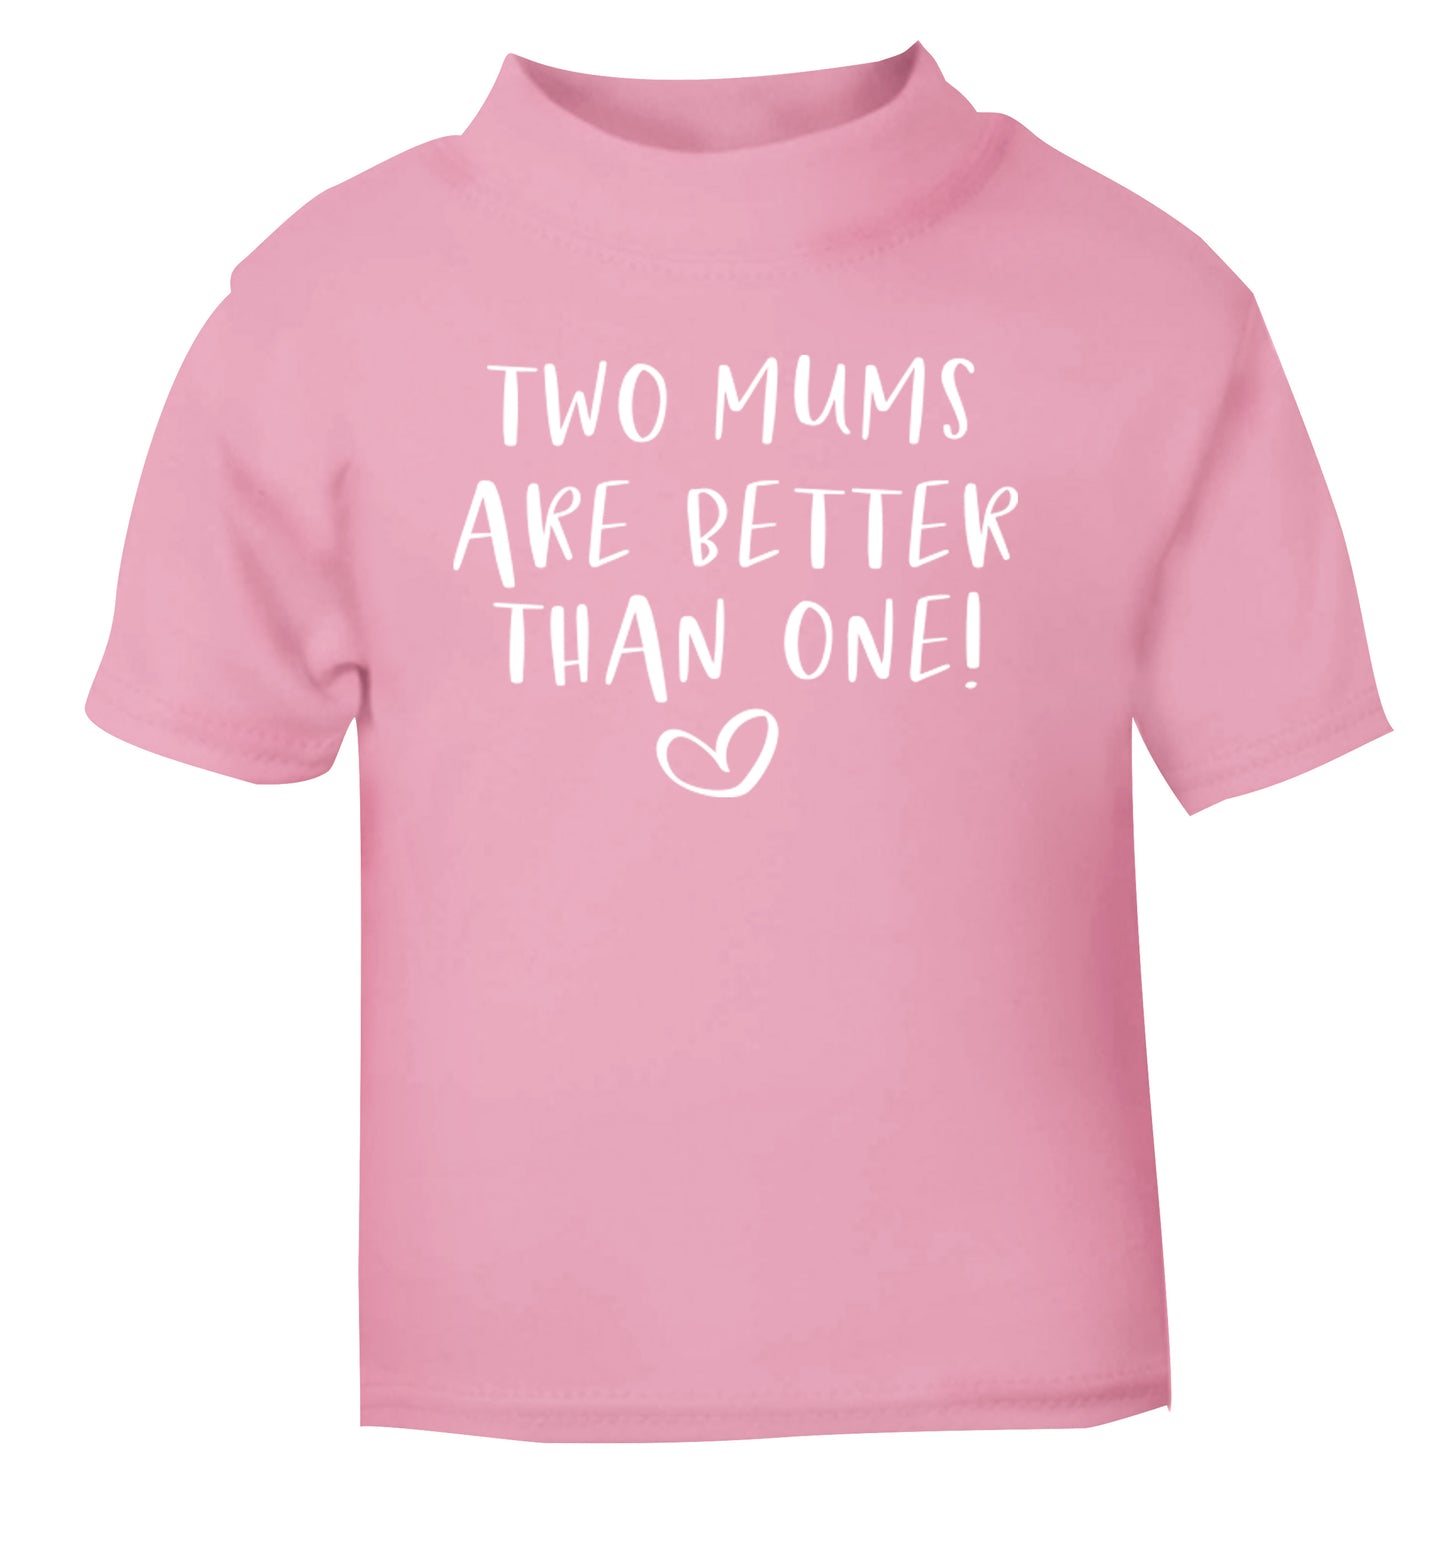 Two mums are better than one light pink baby toddler Tshirt 2 Years